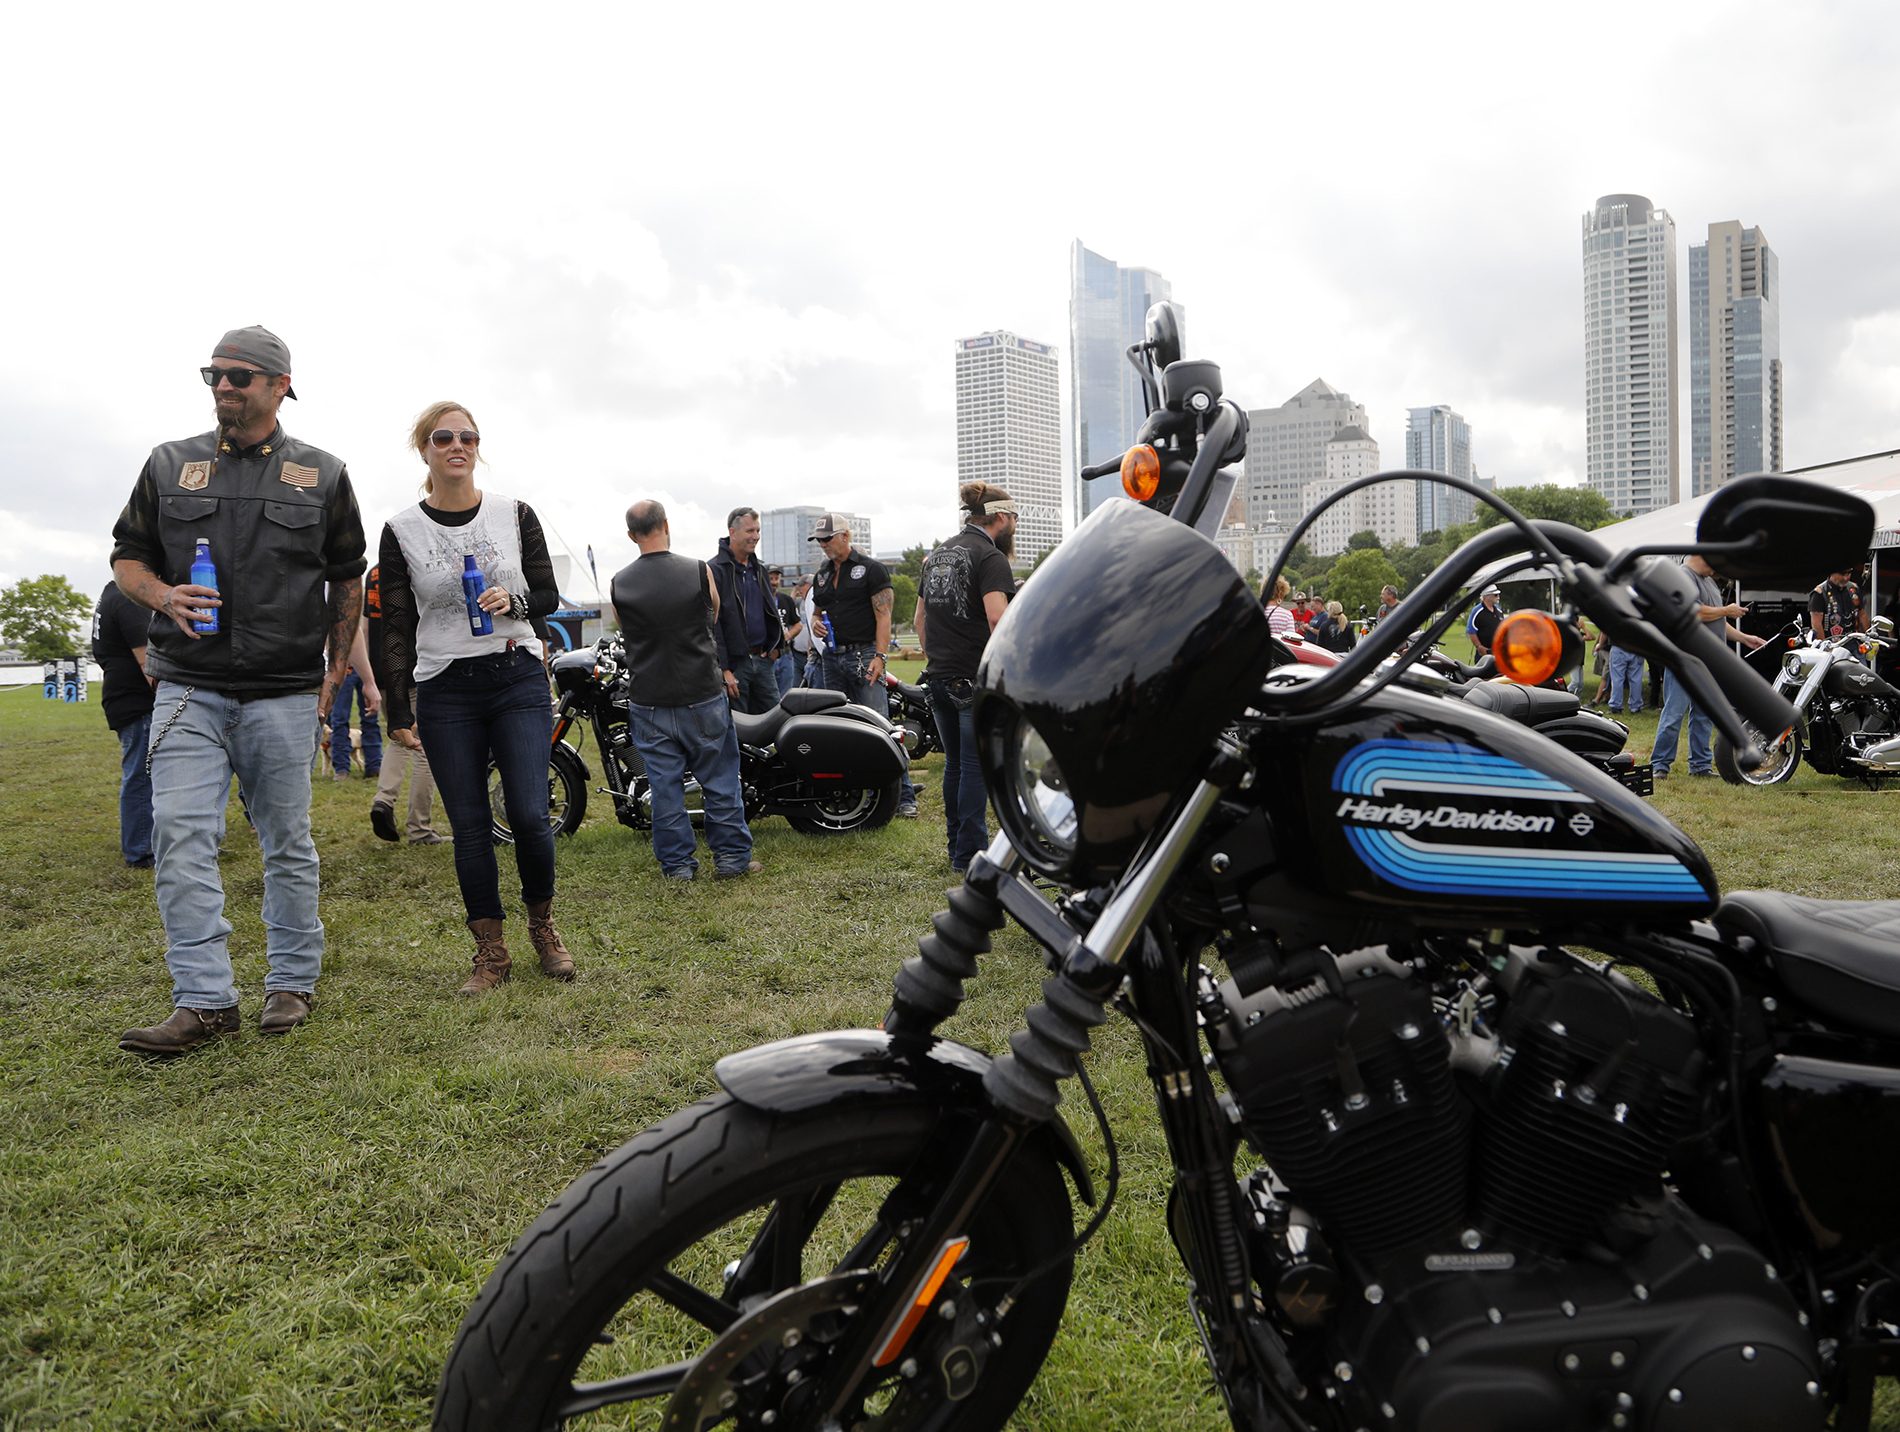 Harley Riders Weigh In On Company’s High-Profile Conflict Over Trump Tariffs